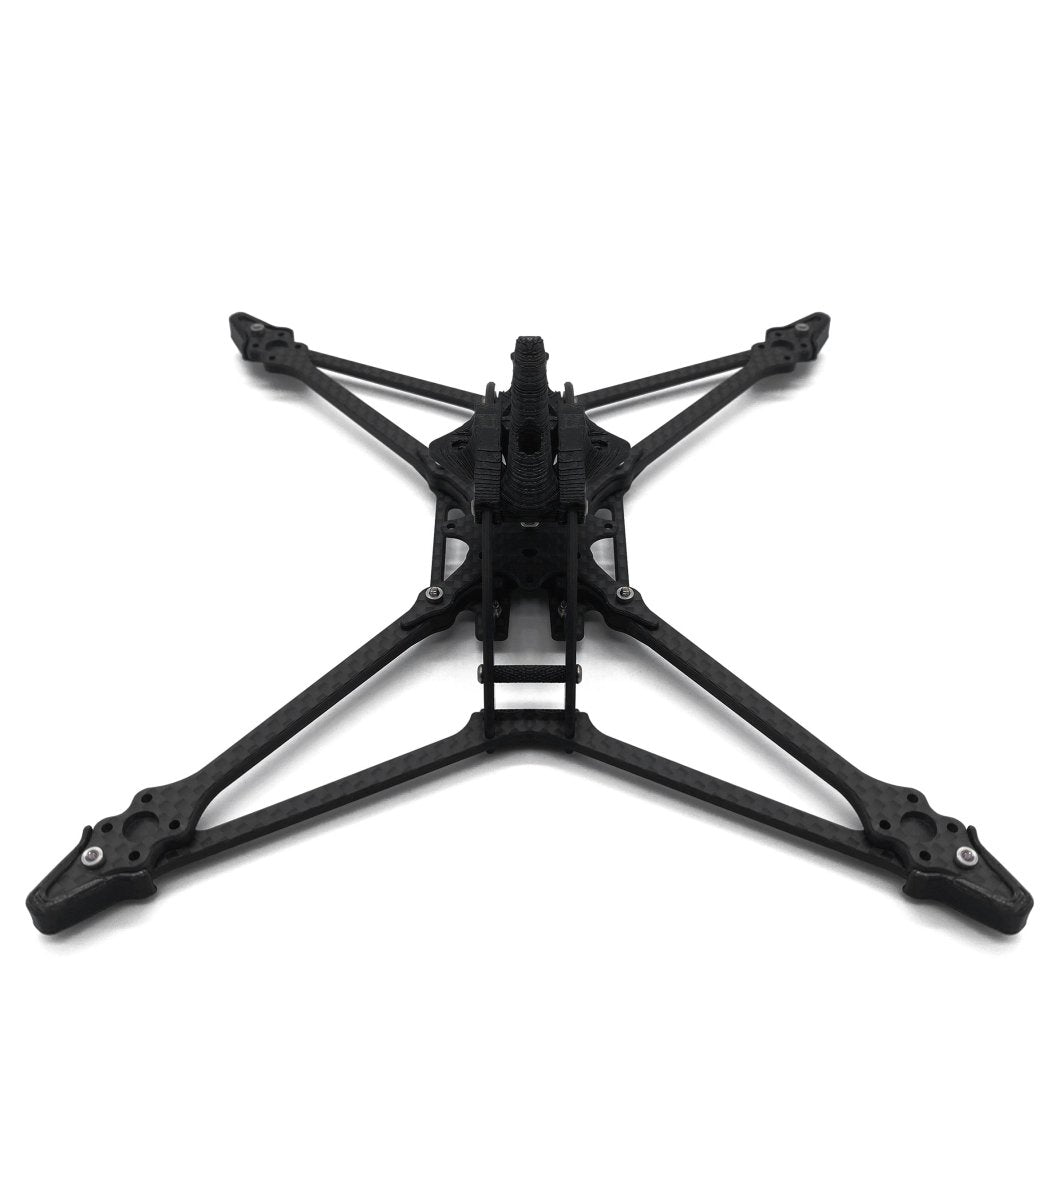 NewBeeDrone Turismo 5'' light weight frame for Racing and Freestyle at WREKD Co.